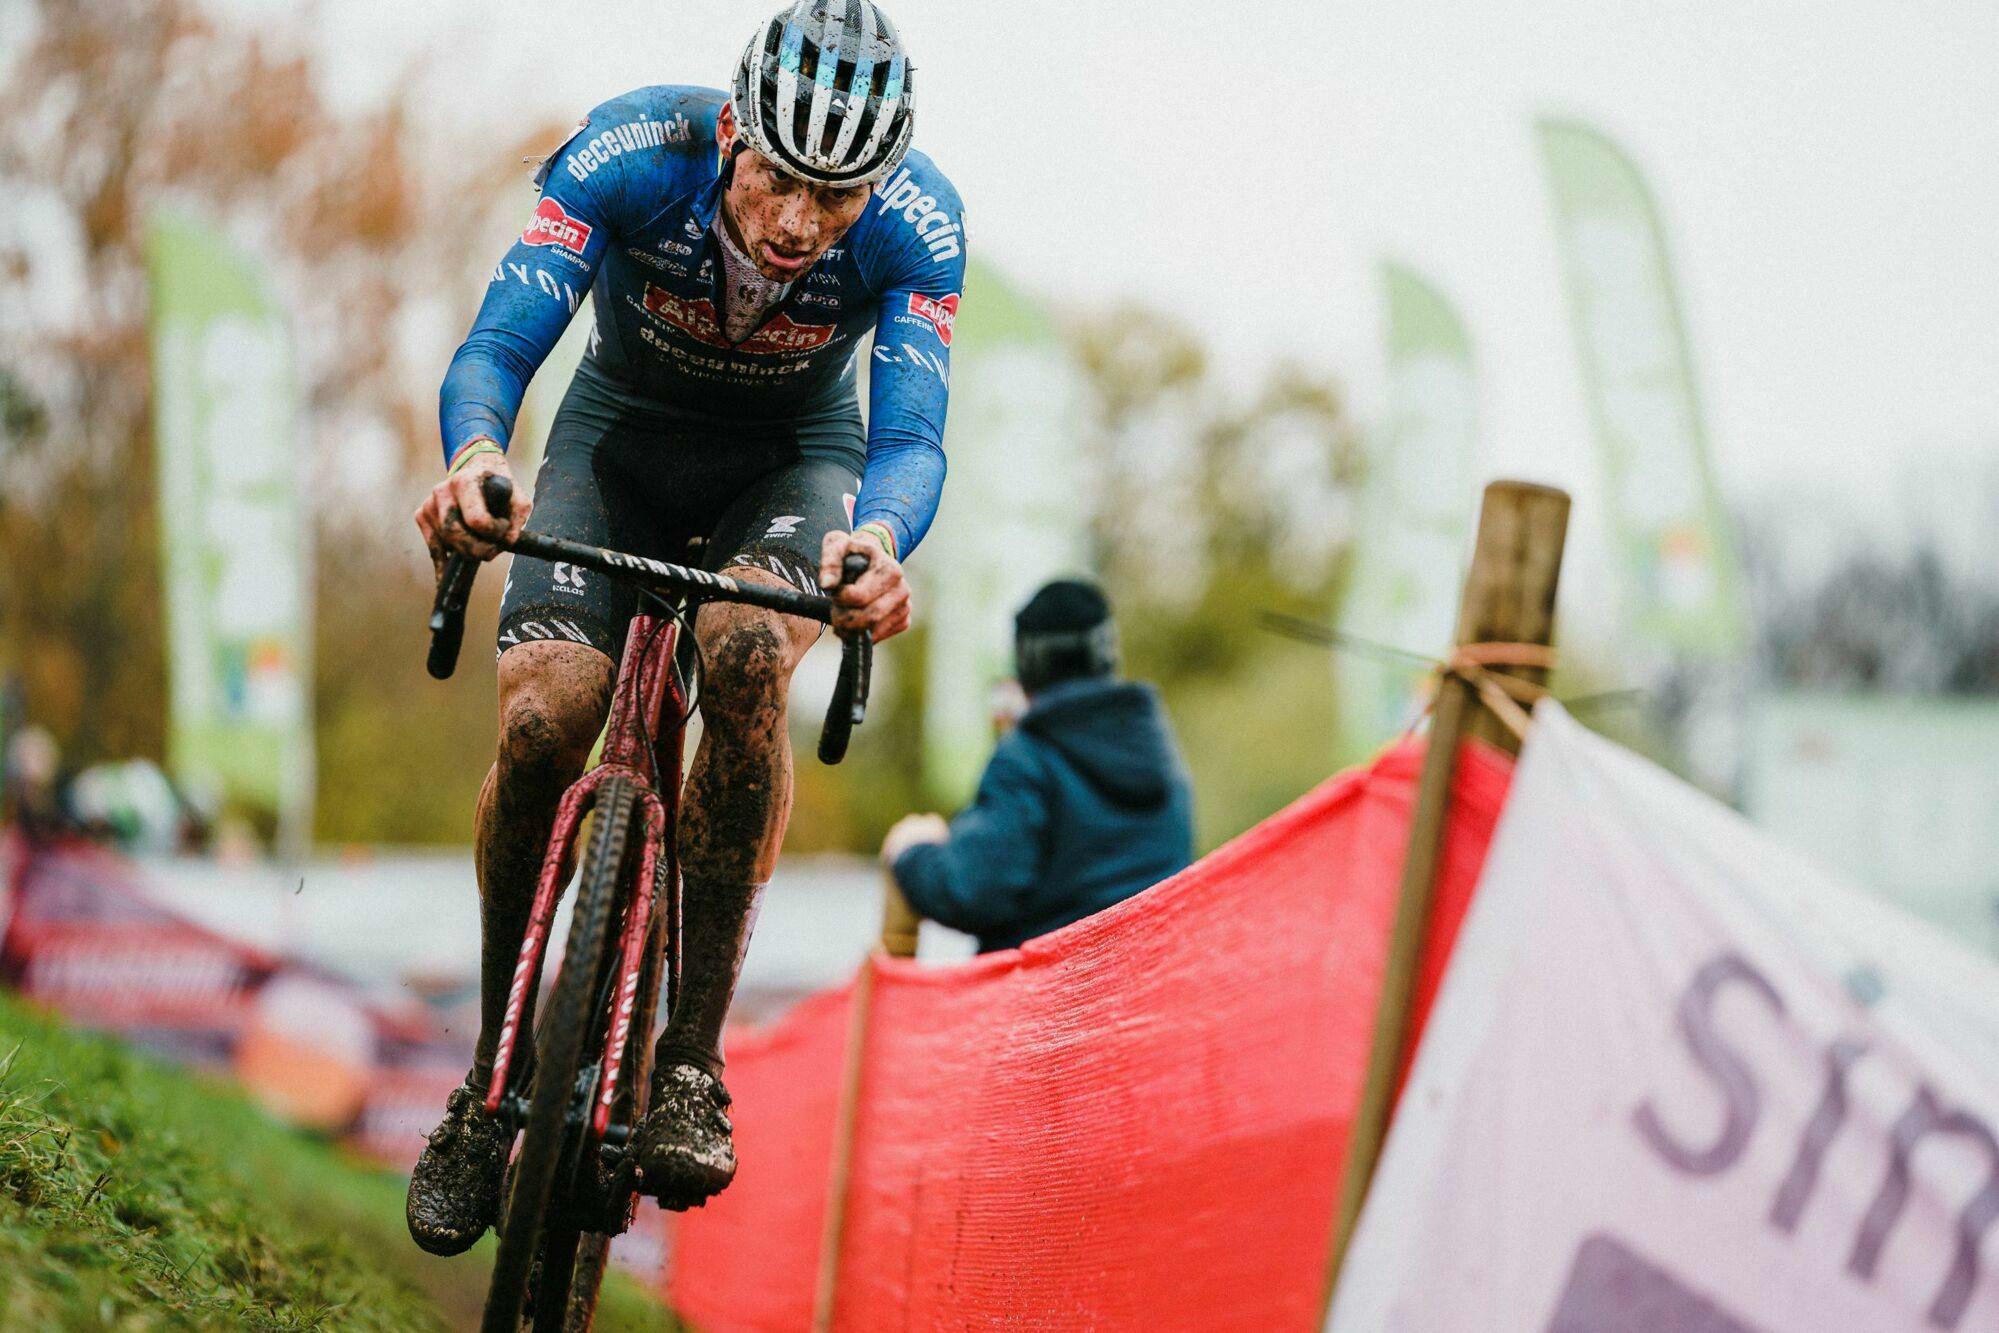 Van der Poel immeadiately wins his first cyclocross race of the season in Hulst